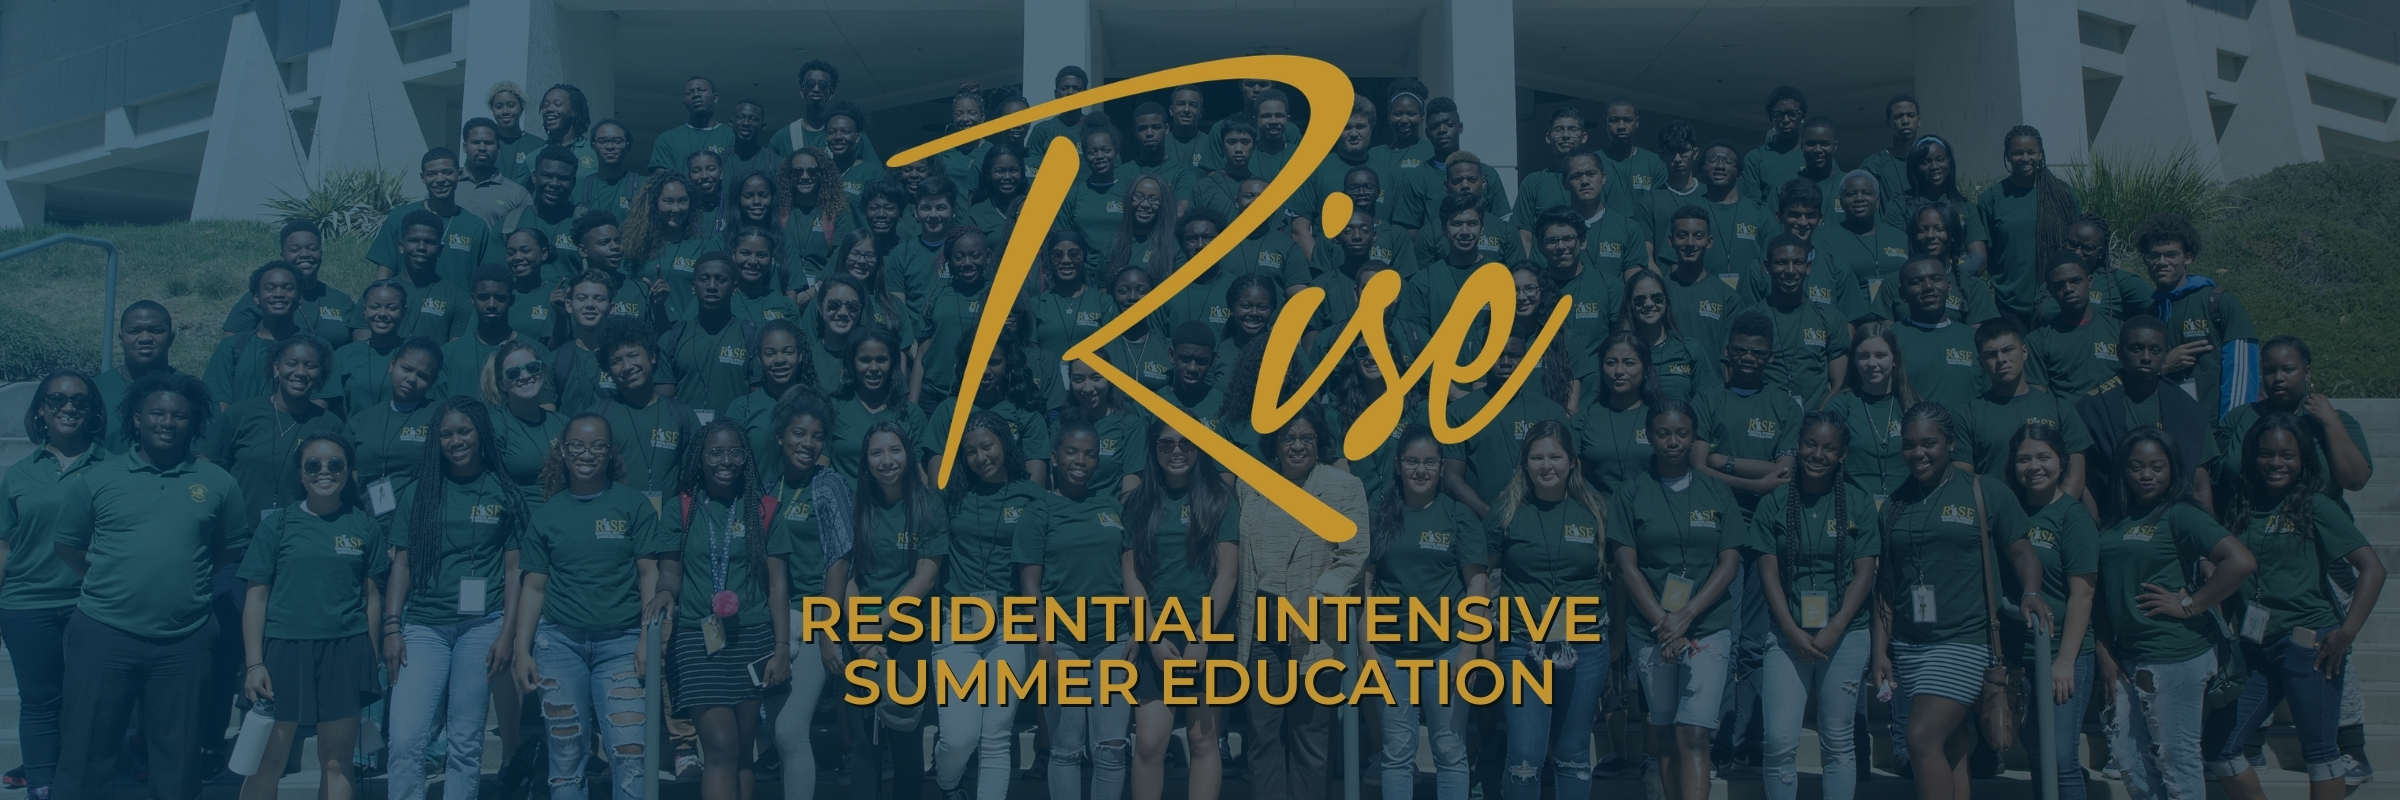 Previous RISE program members with RISE logo